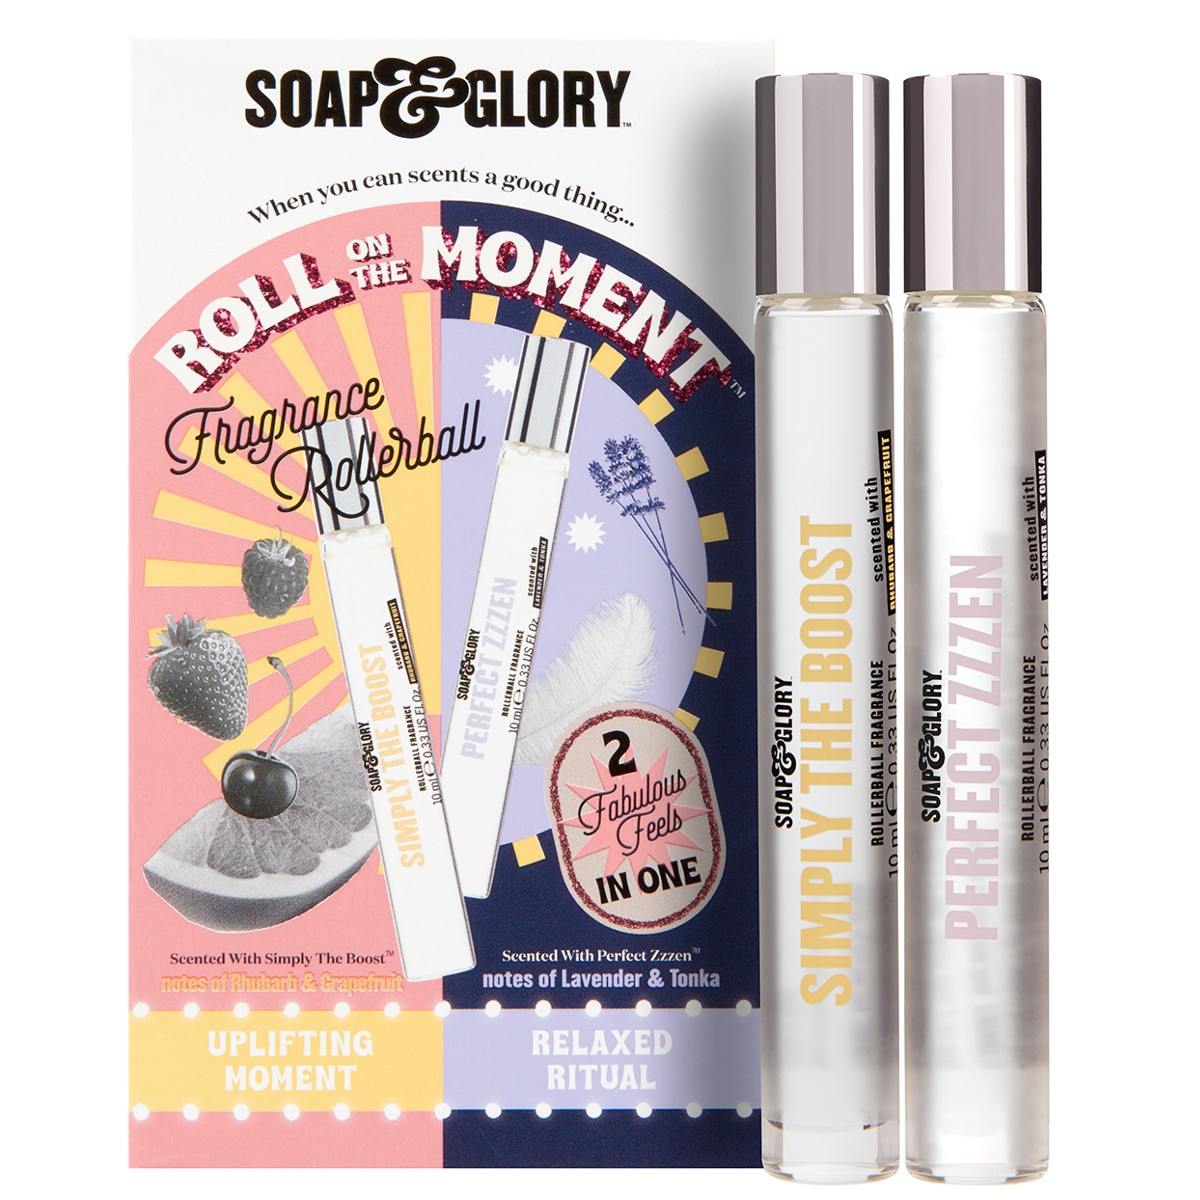 Roll On The Moment Roller Ball Christmas Gift